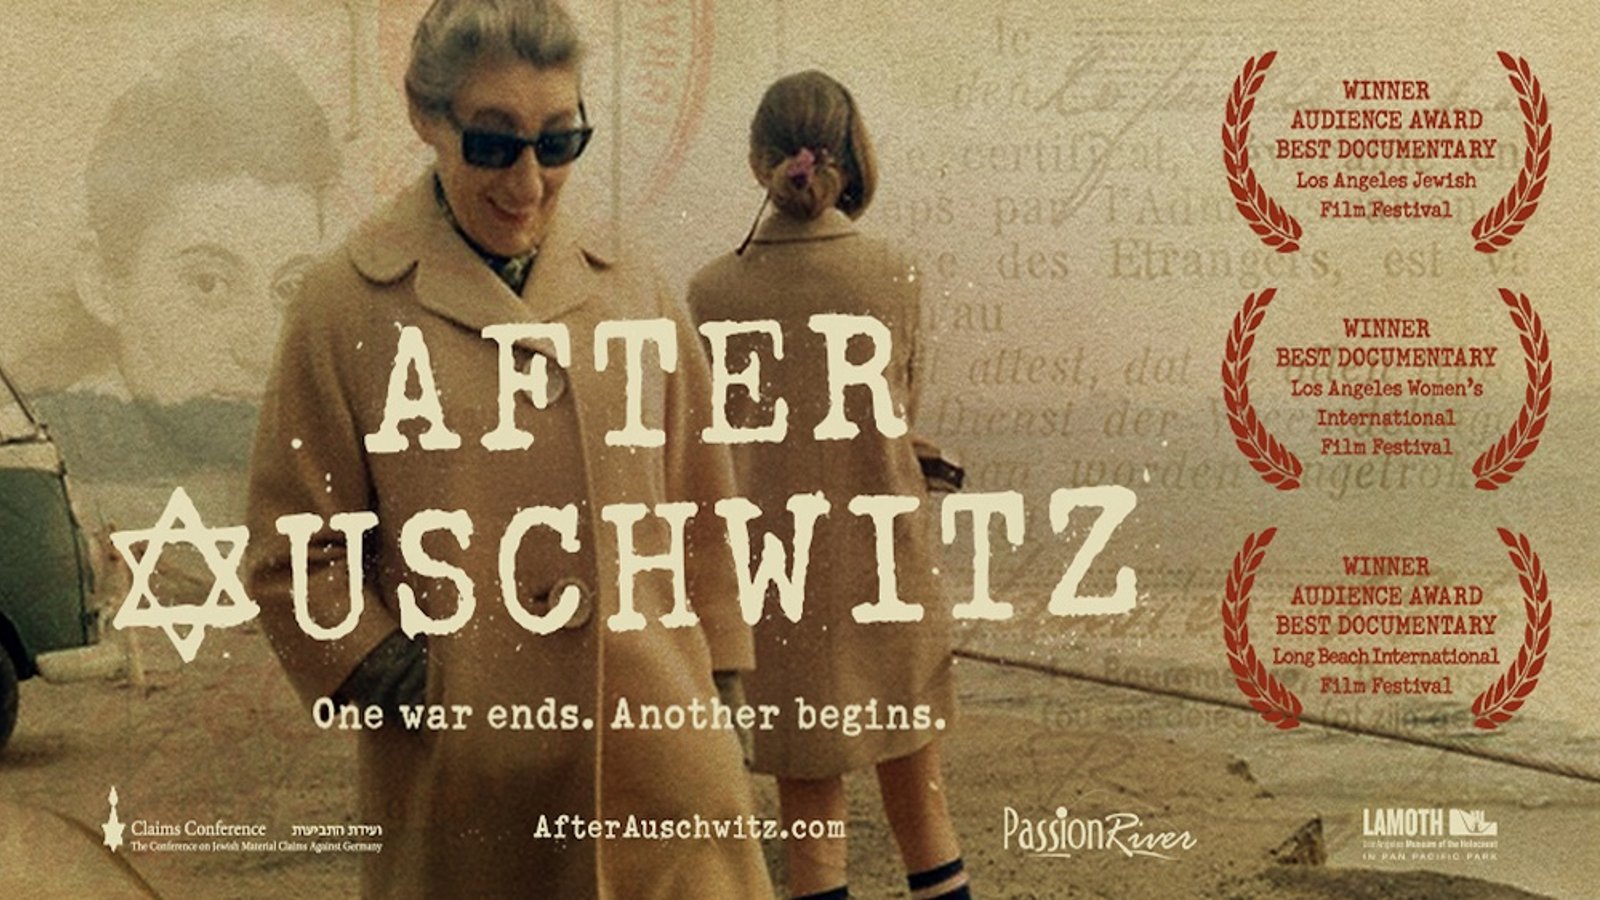 After Auschwitz - Profiling Six Extraordinary Holocaust Survivors and Their Lives After the War